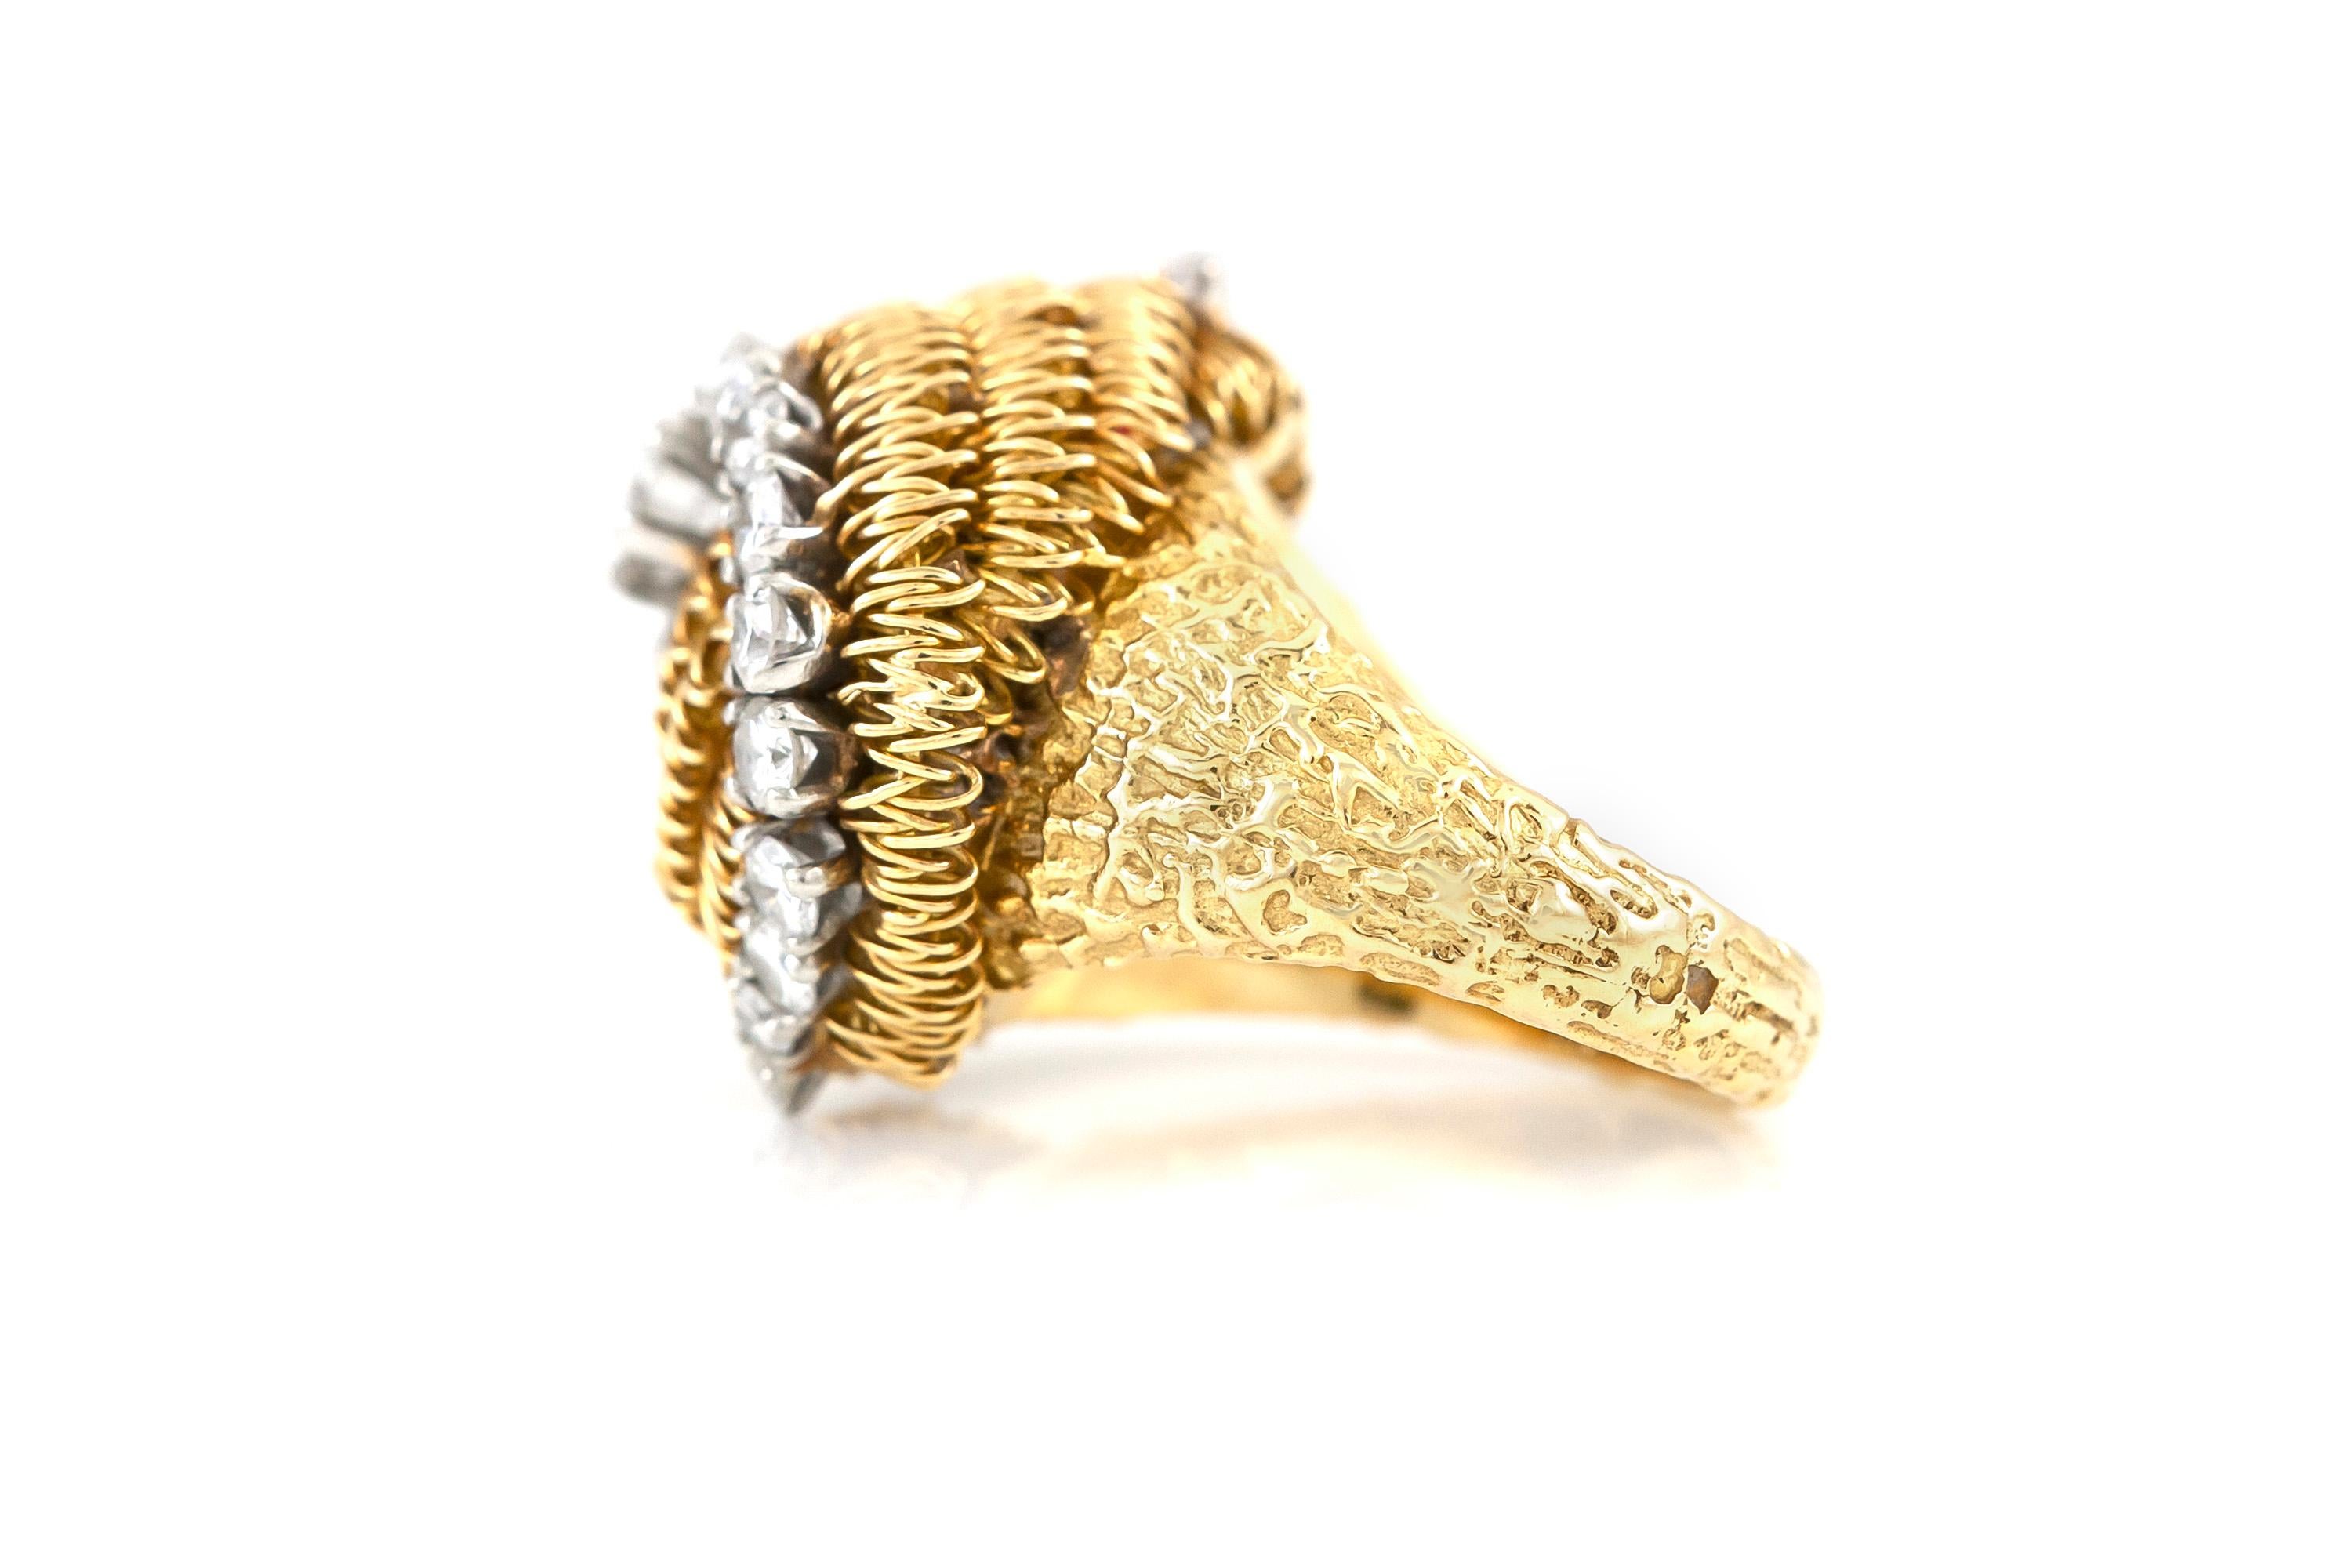 The ring is finely crafted in 18k yellow god with diamonds weighing approximately total of 1.20 carat.
Circa 1950.